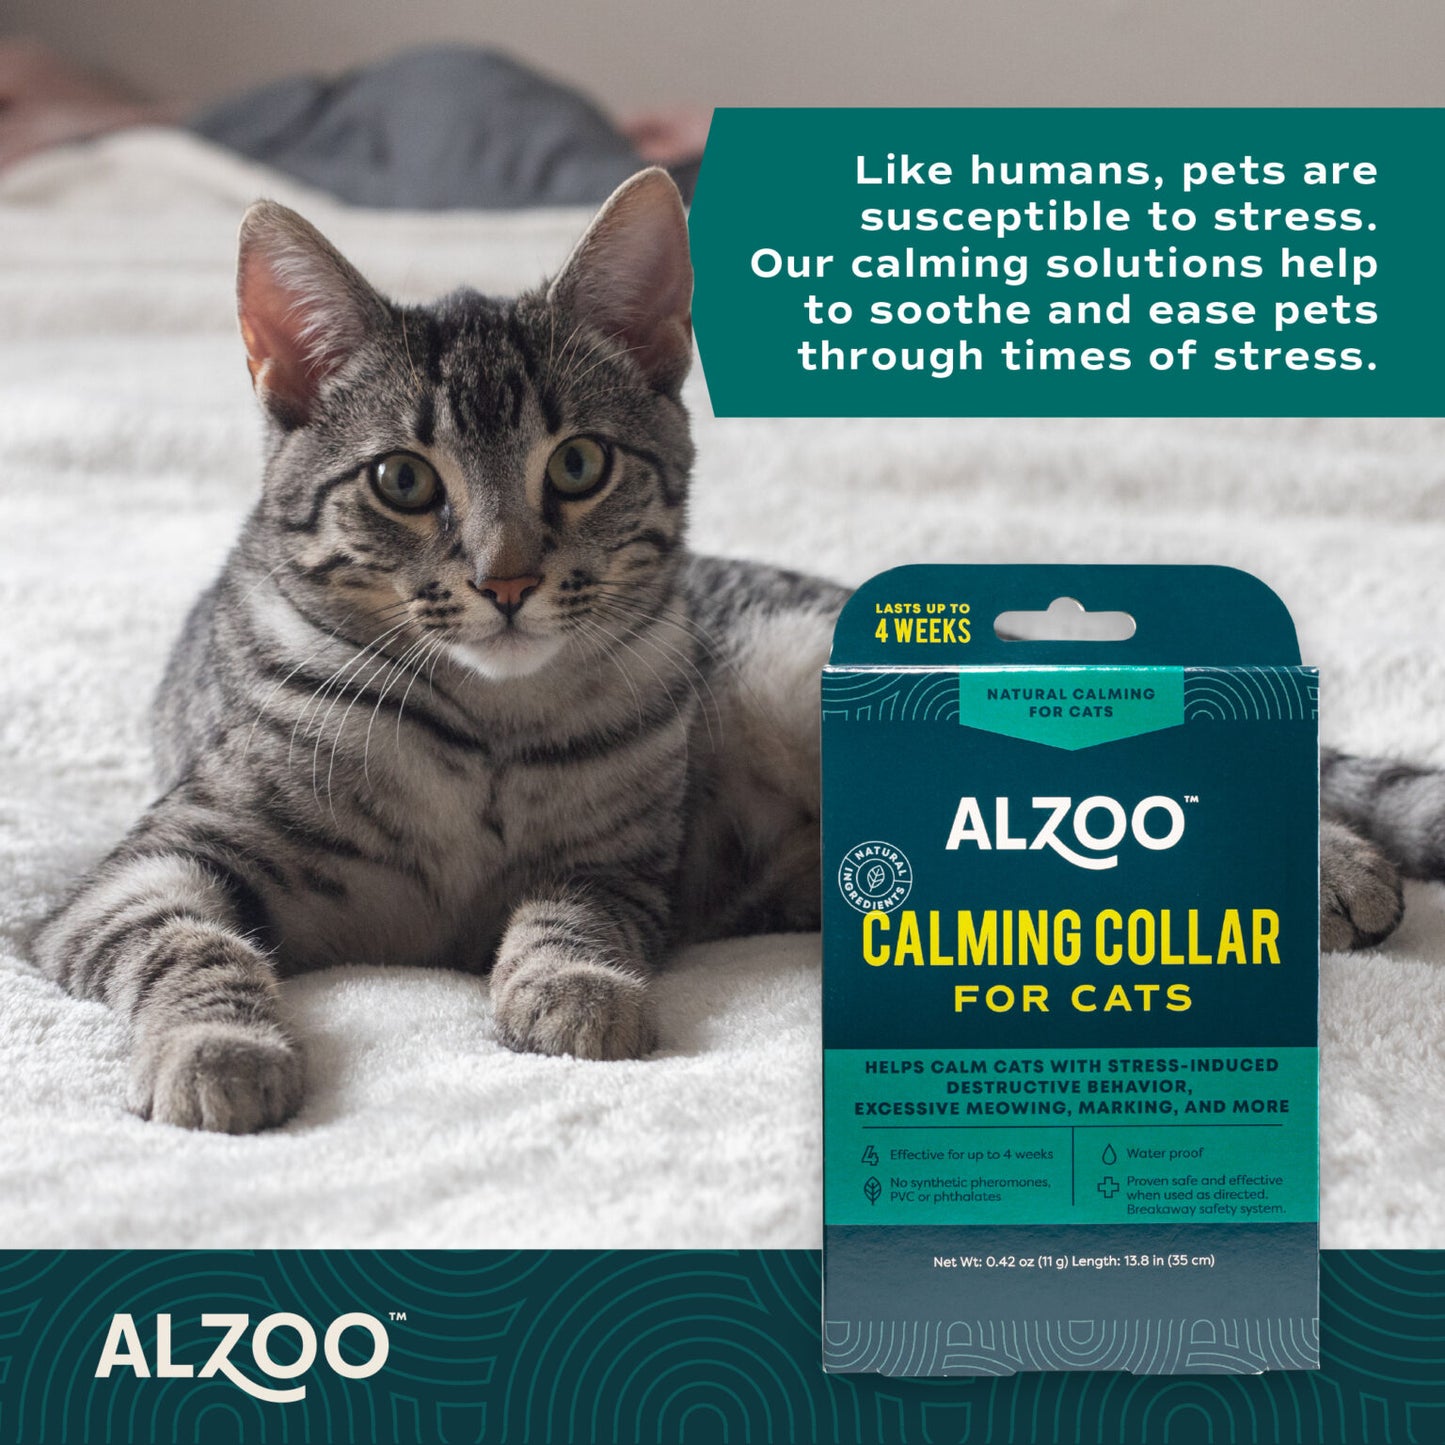 ALZOO Calming Collar for Cats